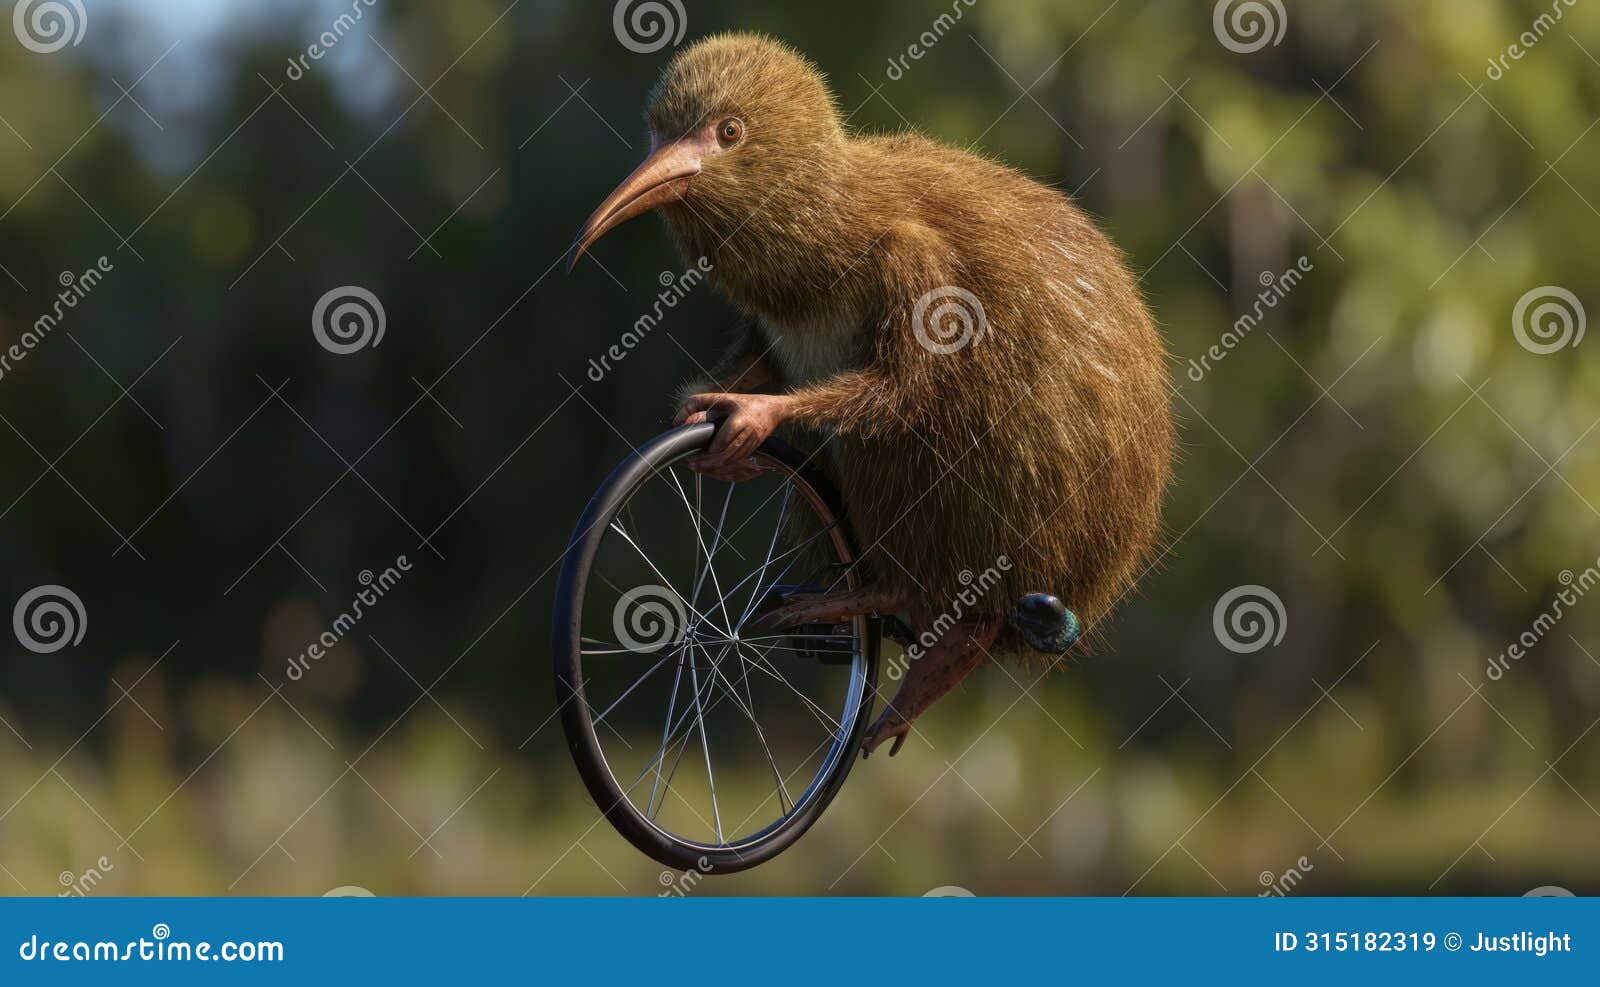 a goofylooking kiwi on a unicycle representing the kingdoms tradition of using unconventional ods to transport their